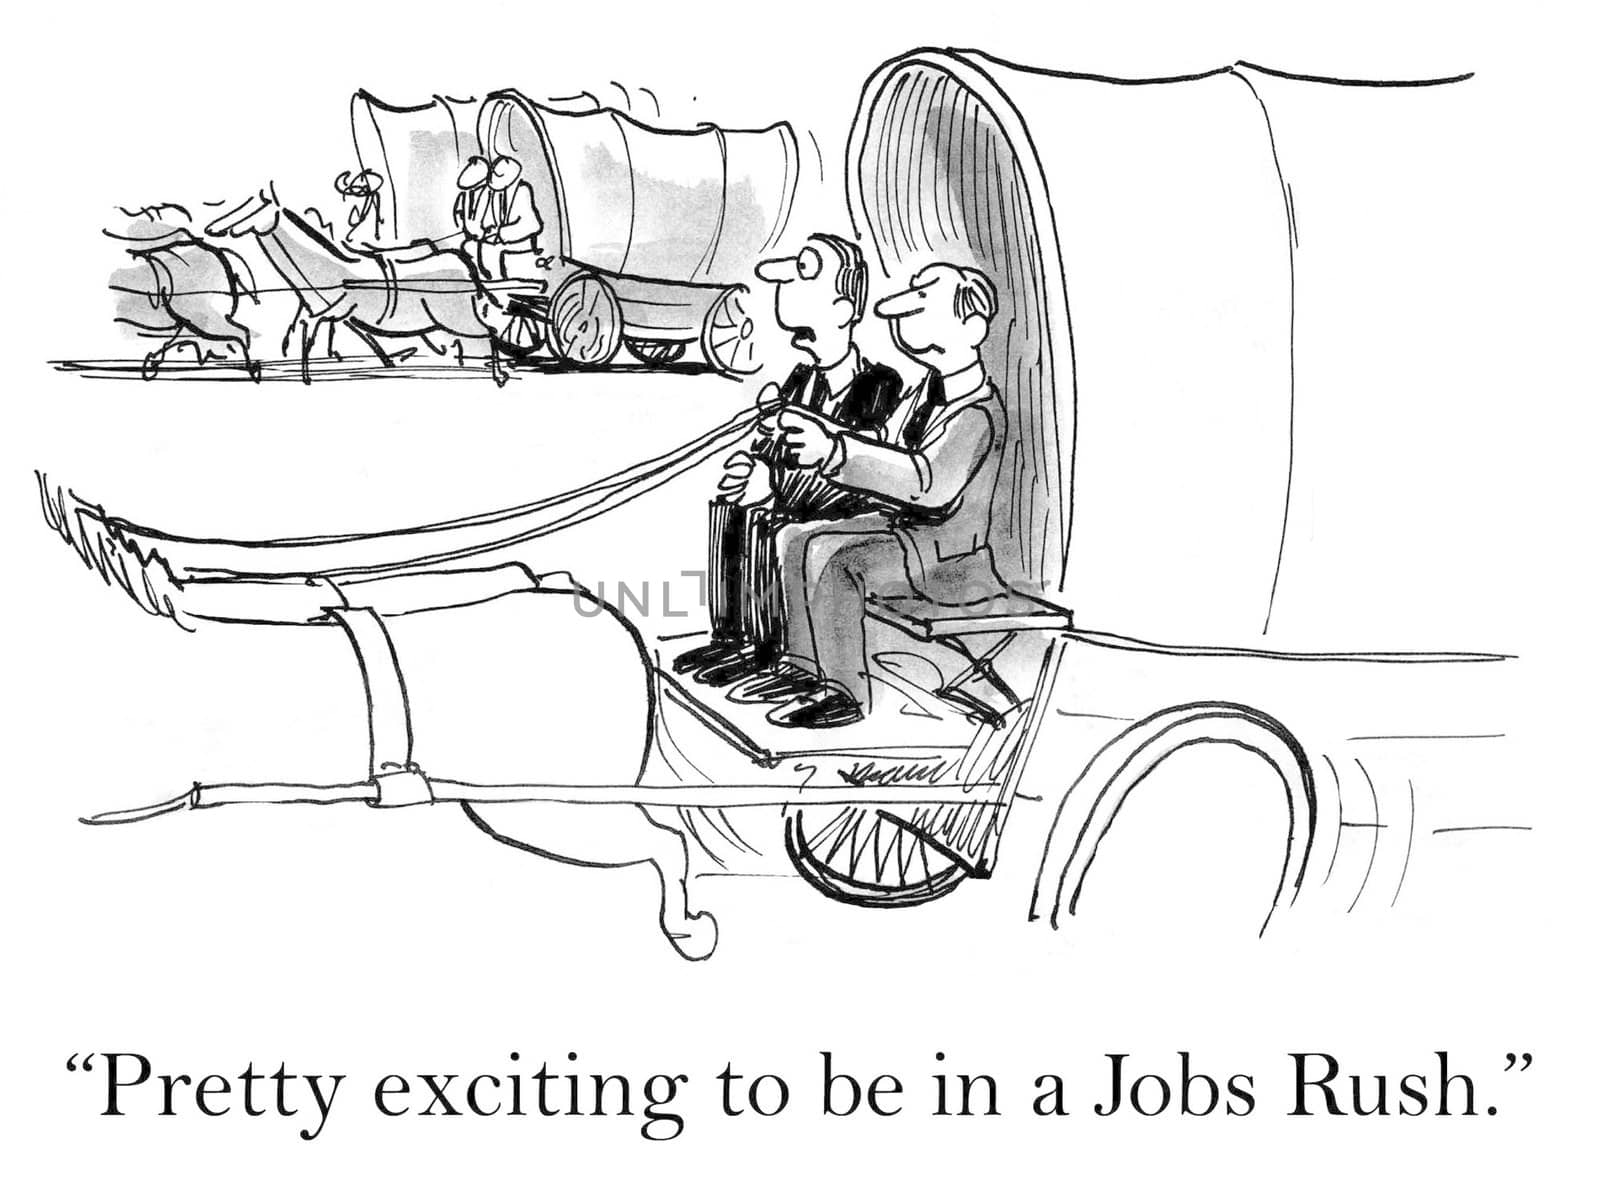 "Pretty exciting to be in a jobs rush."